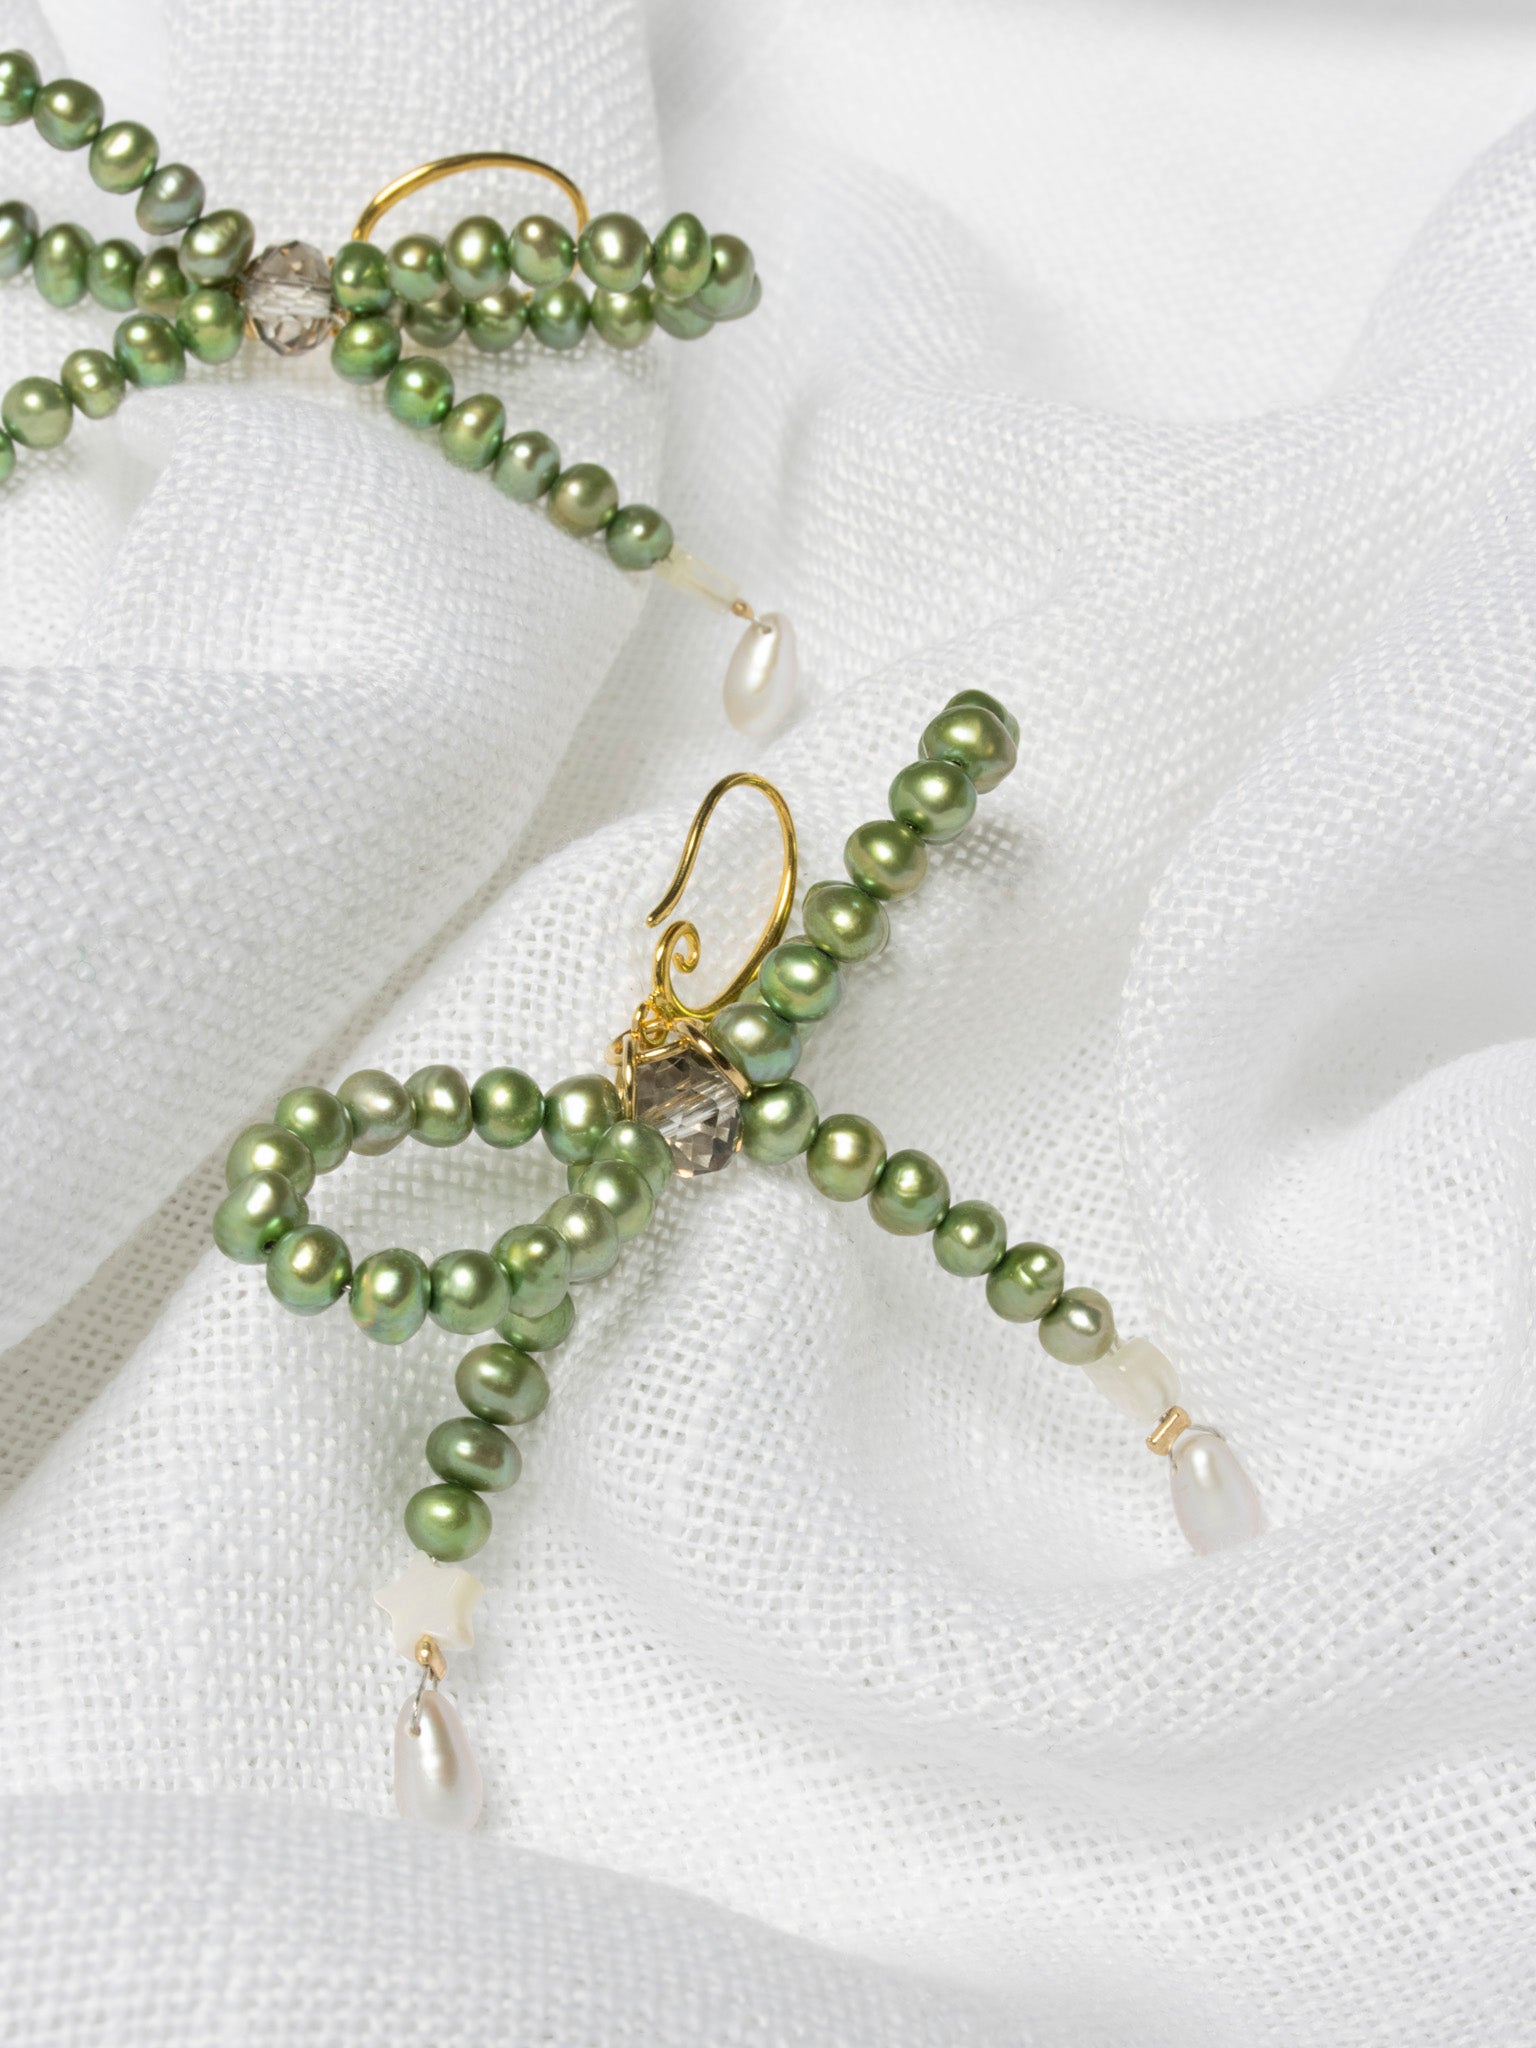 Jewels by Jewish Babe - Green Bow Earrings